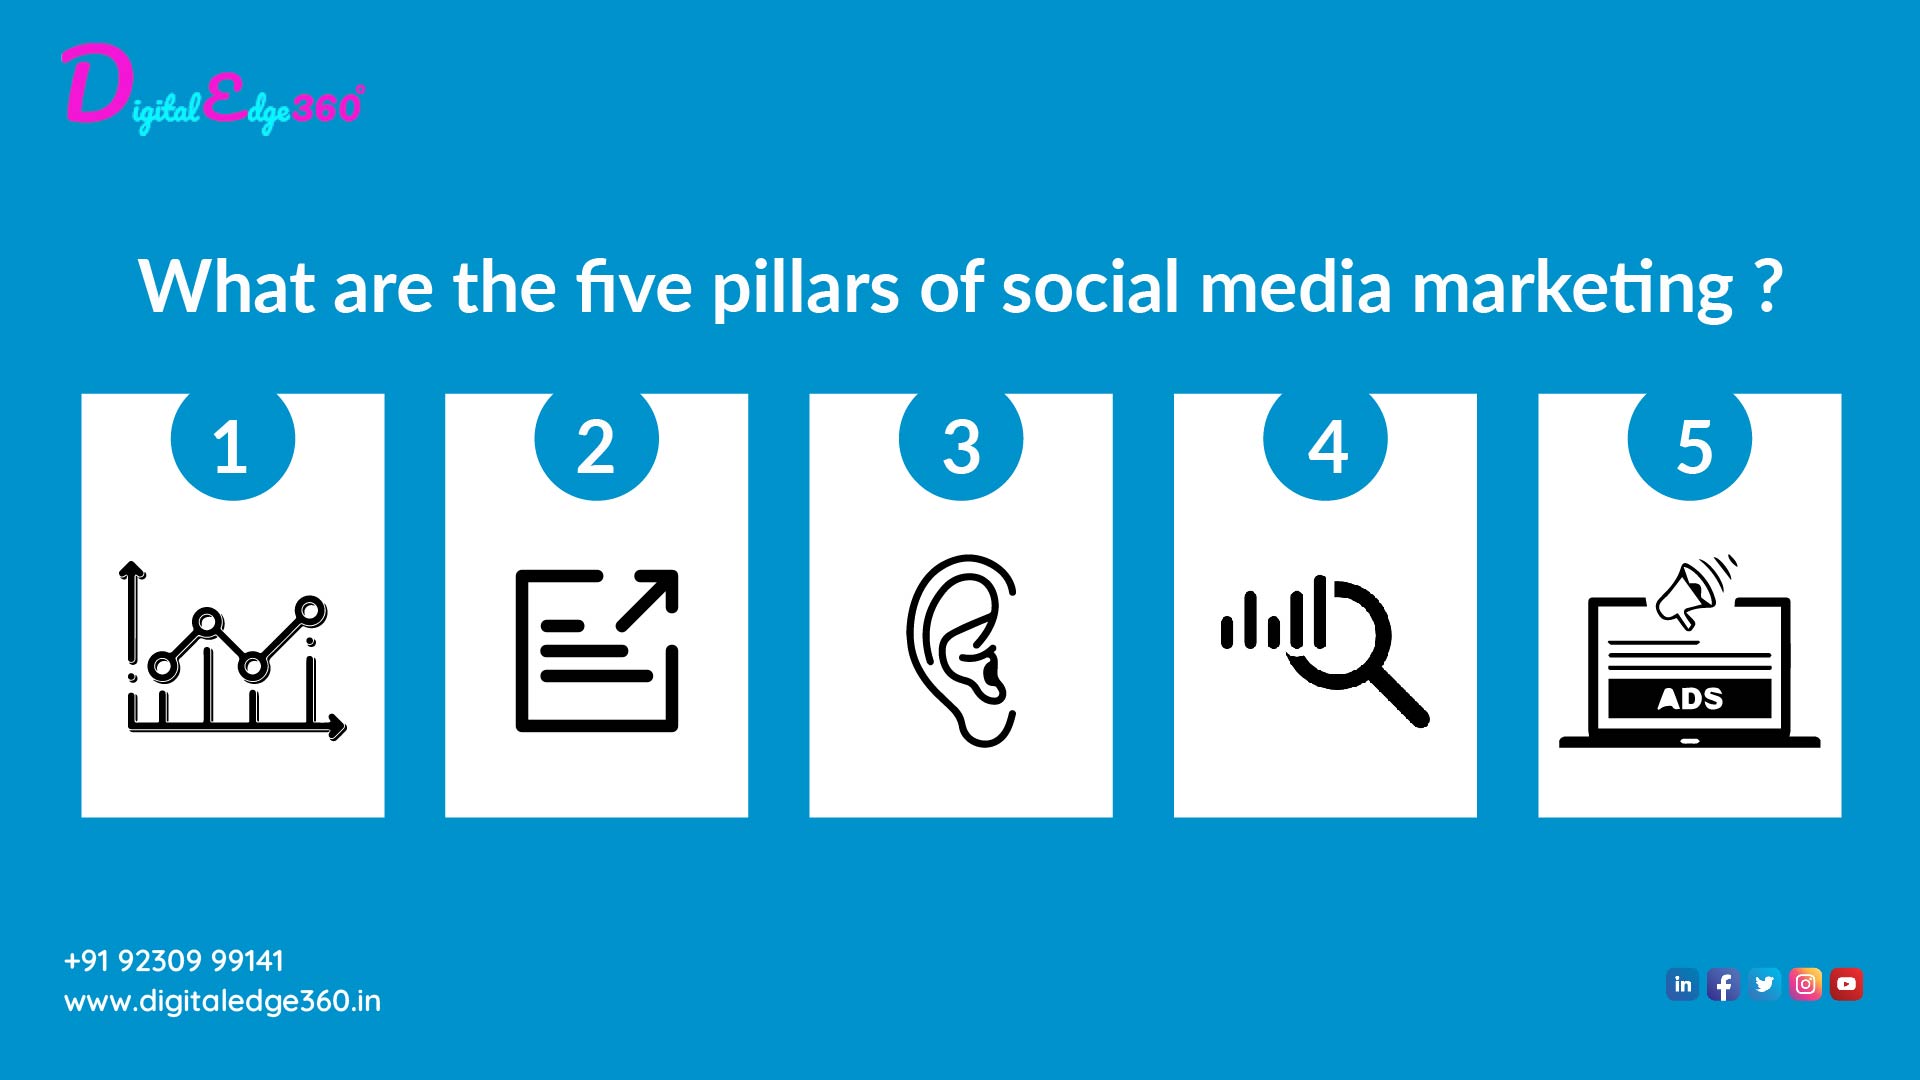 What are the five pillars of social media marketing?